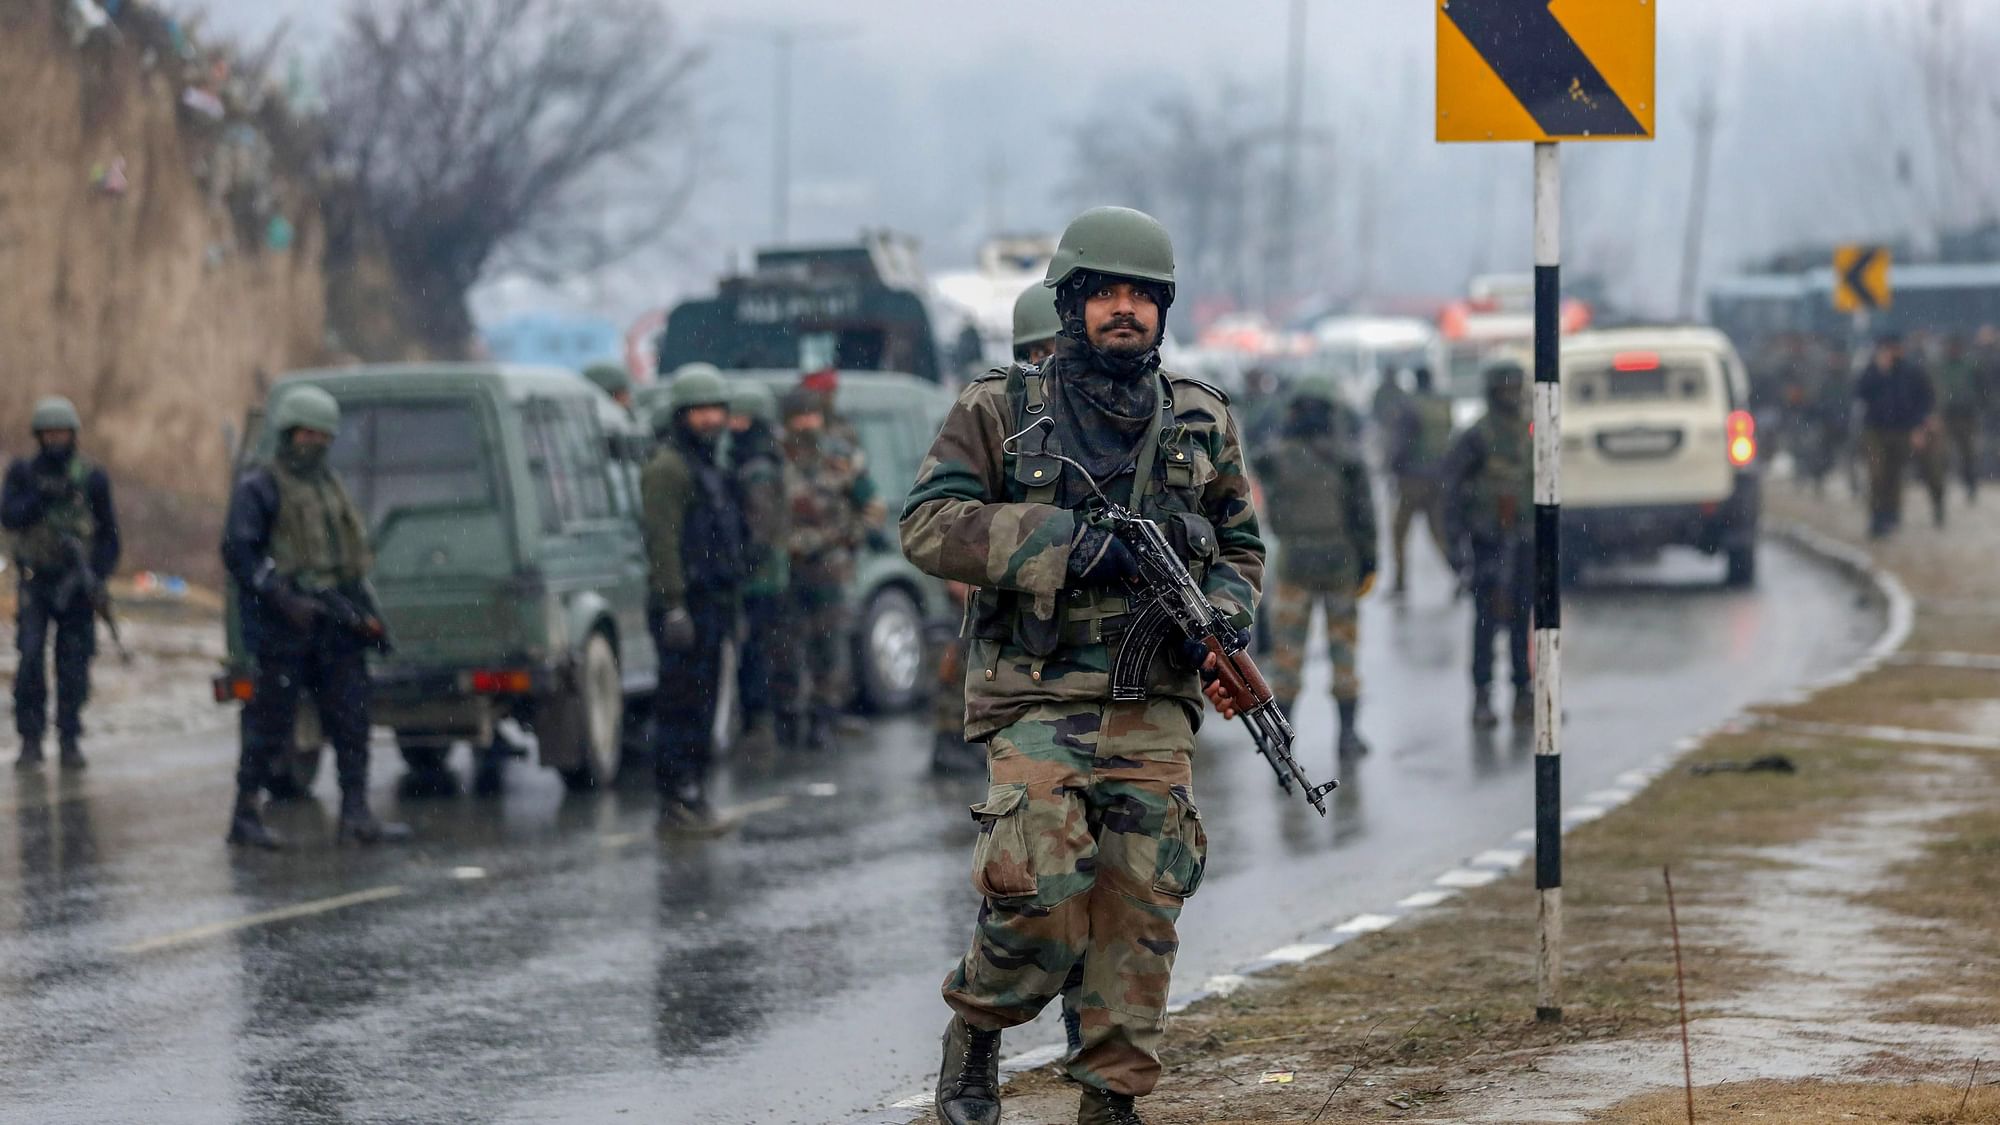 <div class="paragraphs"><p>At least 39 CRPF personnel were killed in an IED blast in Jammu and Kashmir's Pulwama in 2019.</p></div>